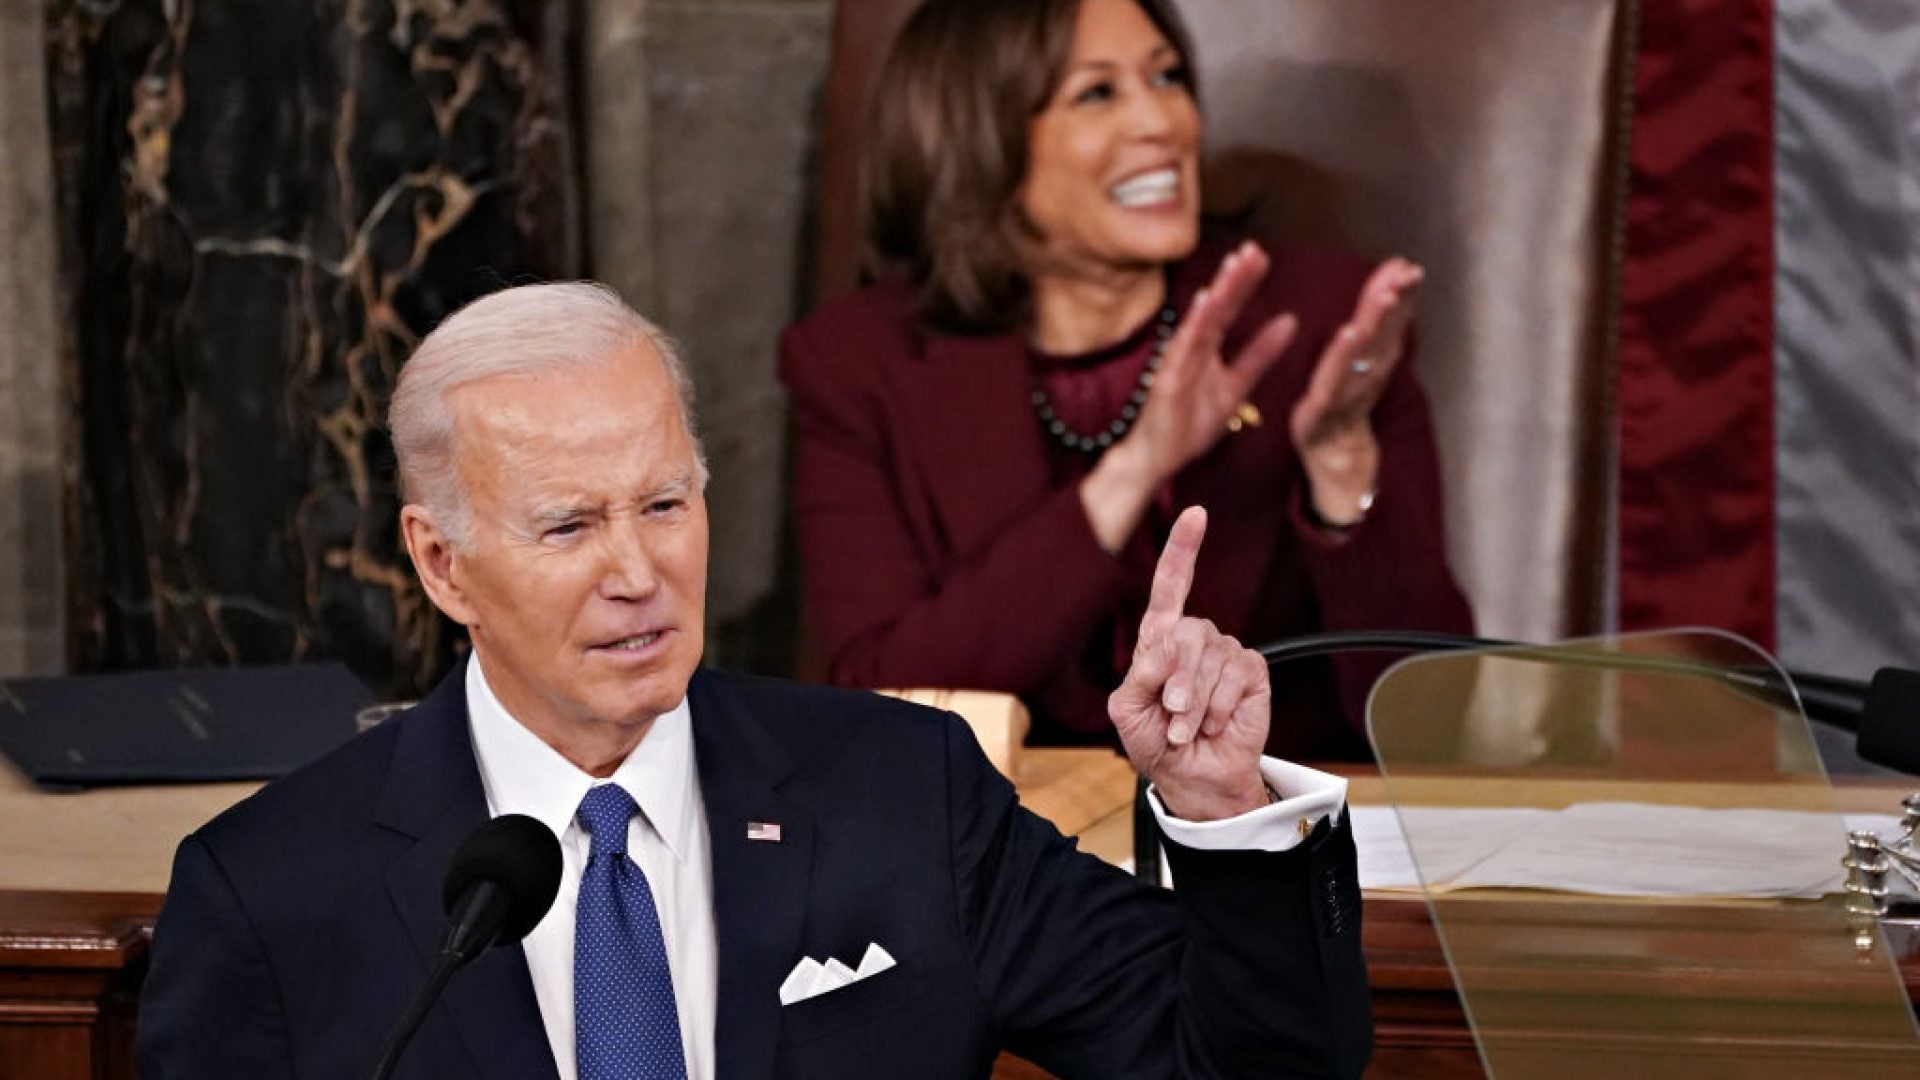 What Black Issues Did President Biden Discuss At Last Night's State Of The Union Address?